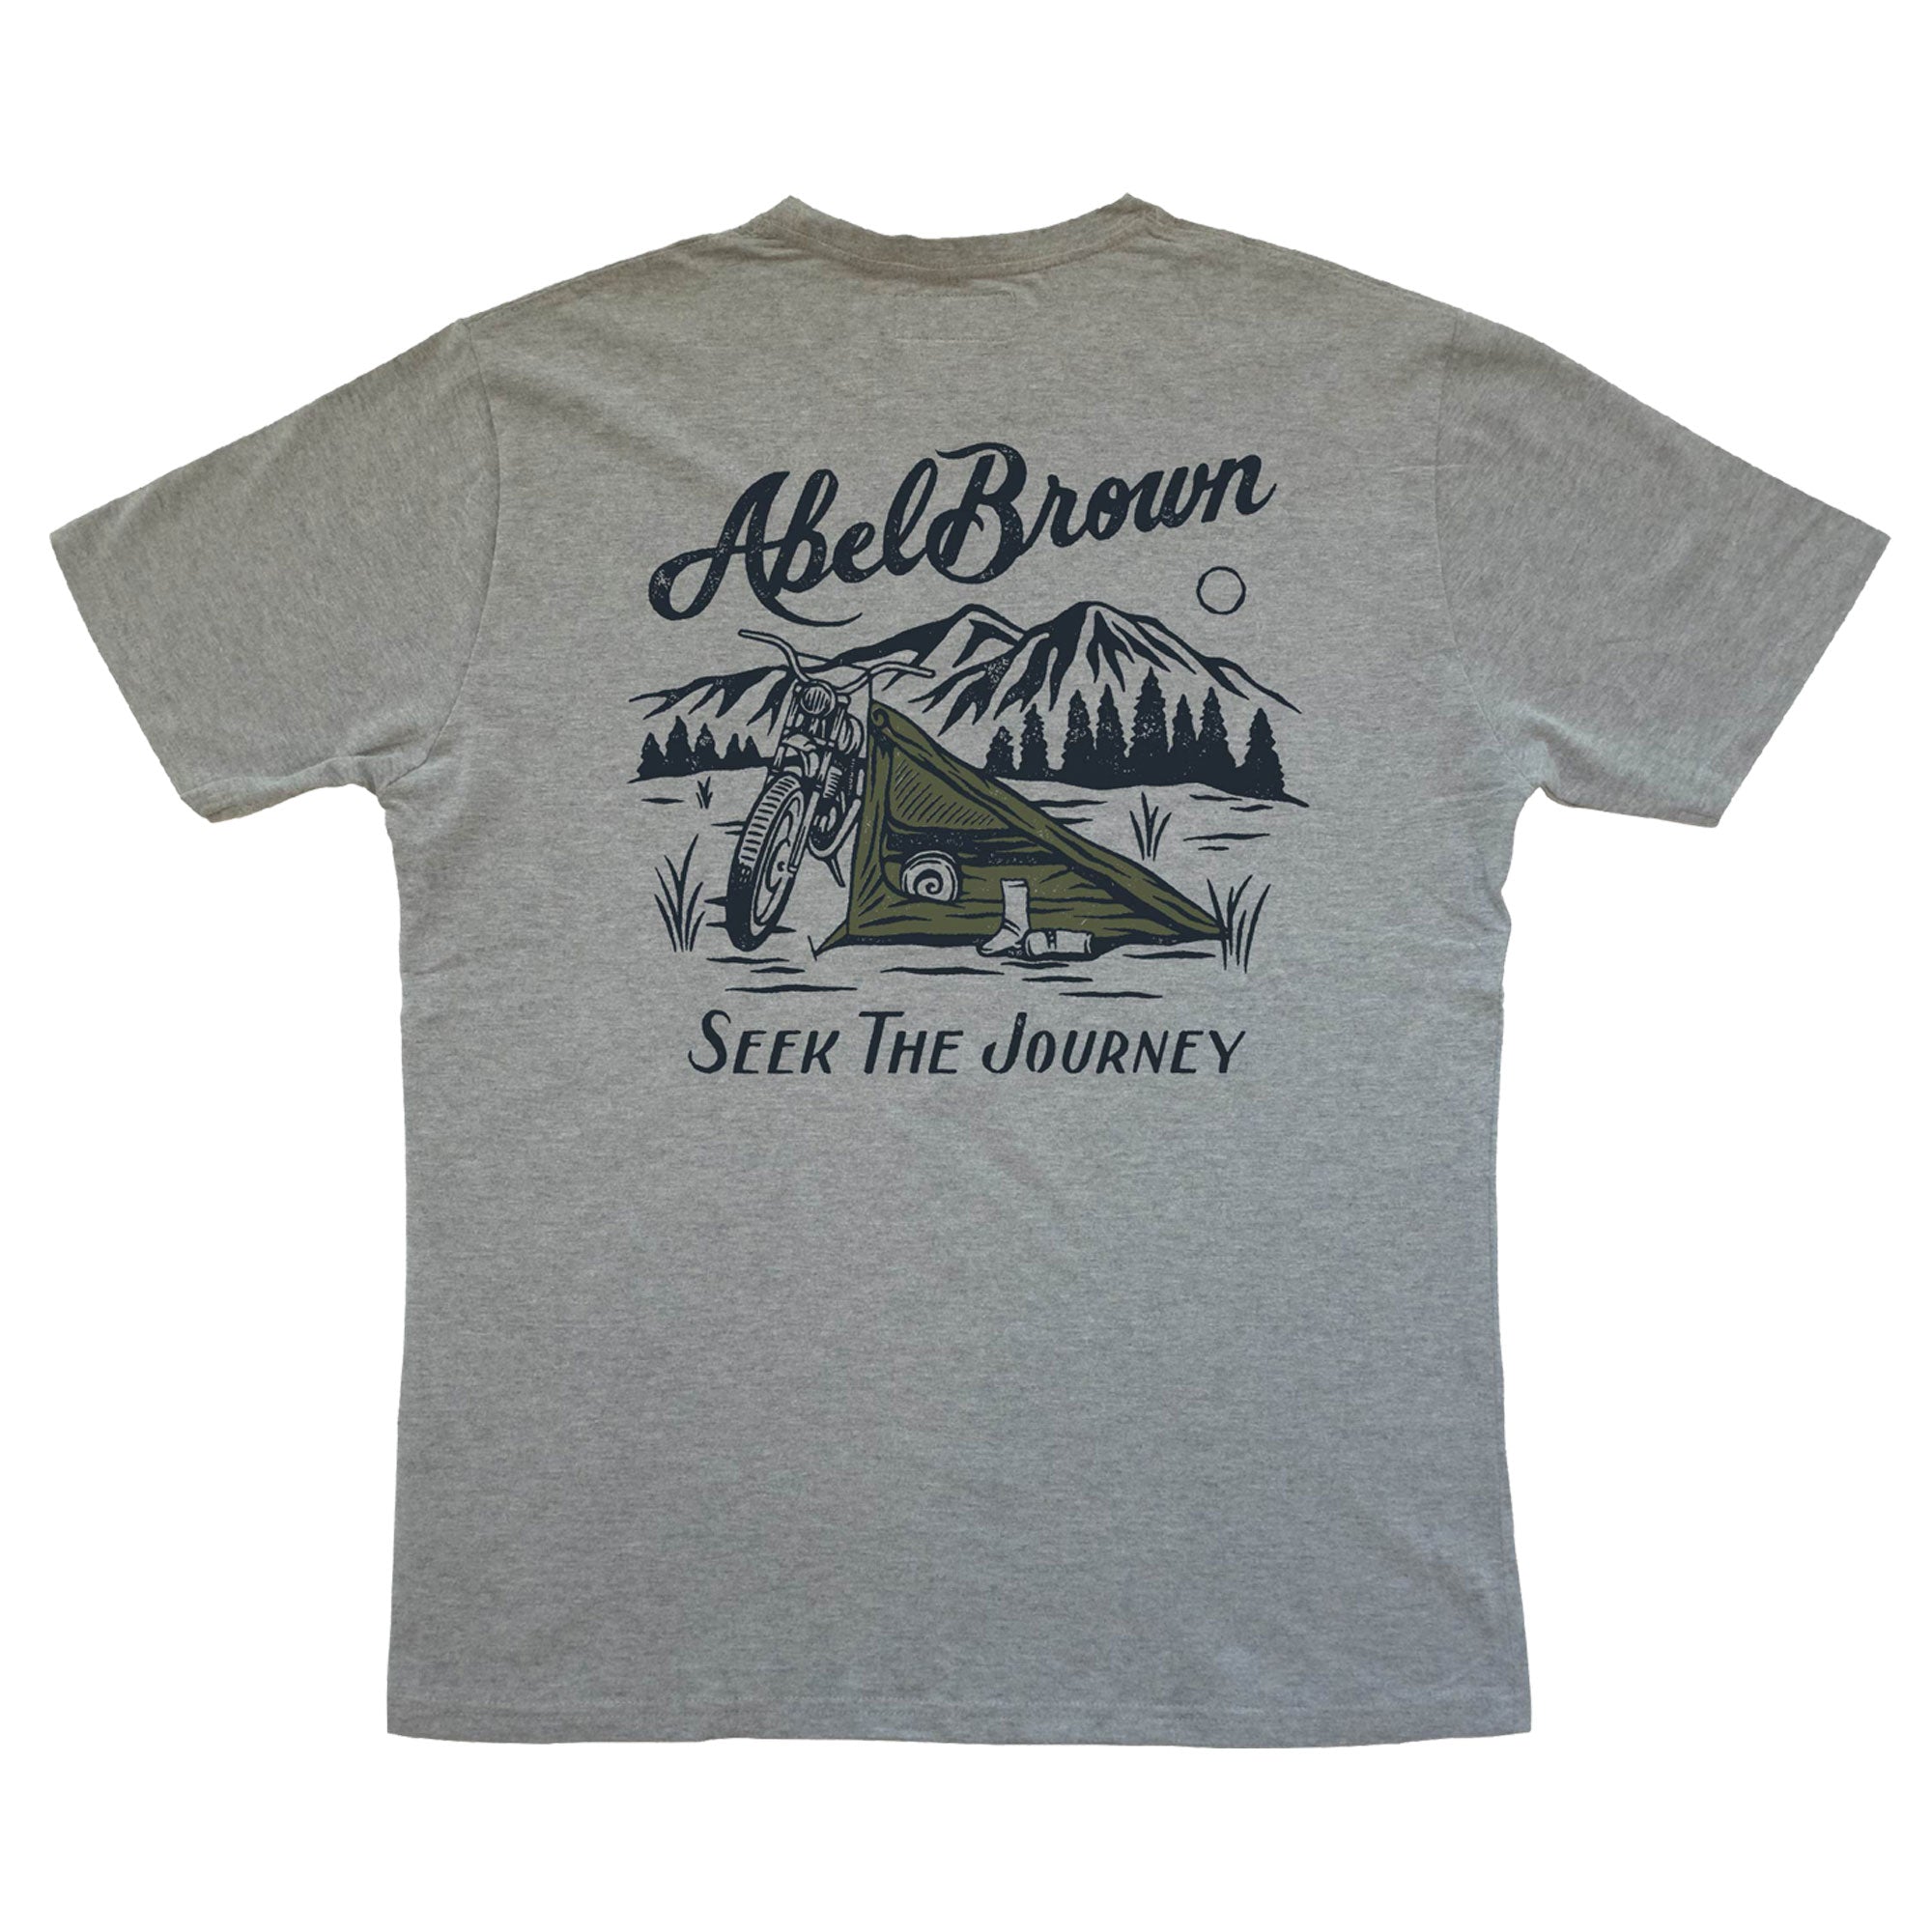 Abel Brown Nomad Tent t-shirt printed on organic cotton softest tee shirt in your closet.  Shows picture of our Nomad tent fixed to a motorcycle in the mountains